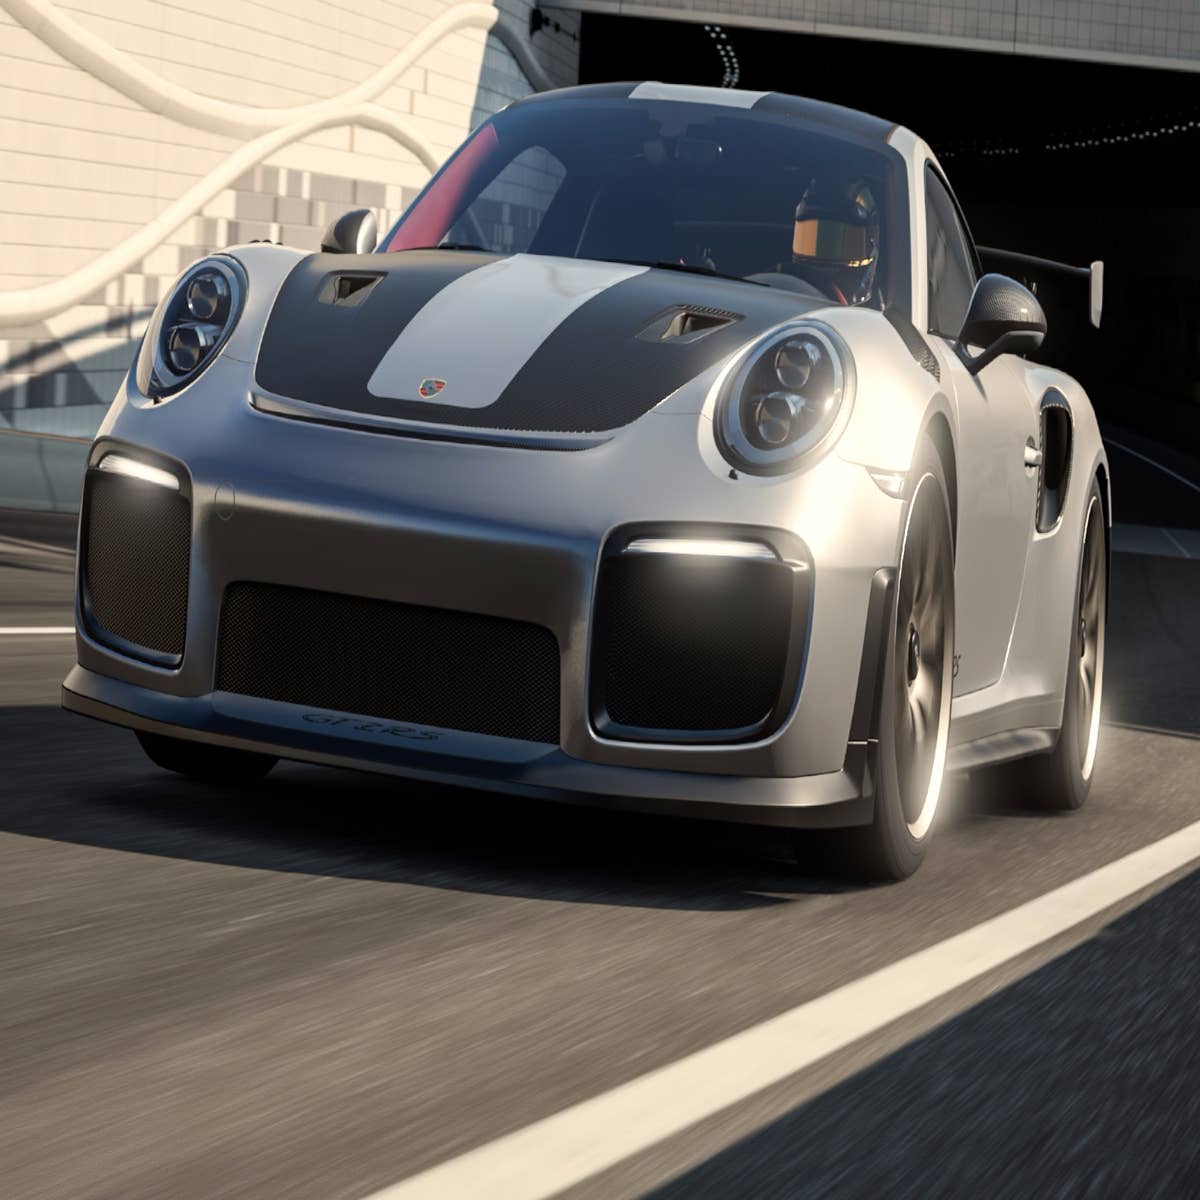 Forza Motorsport Hands-on Impressions Coming September 11th